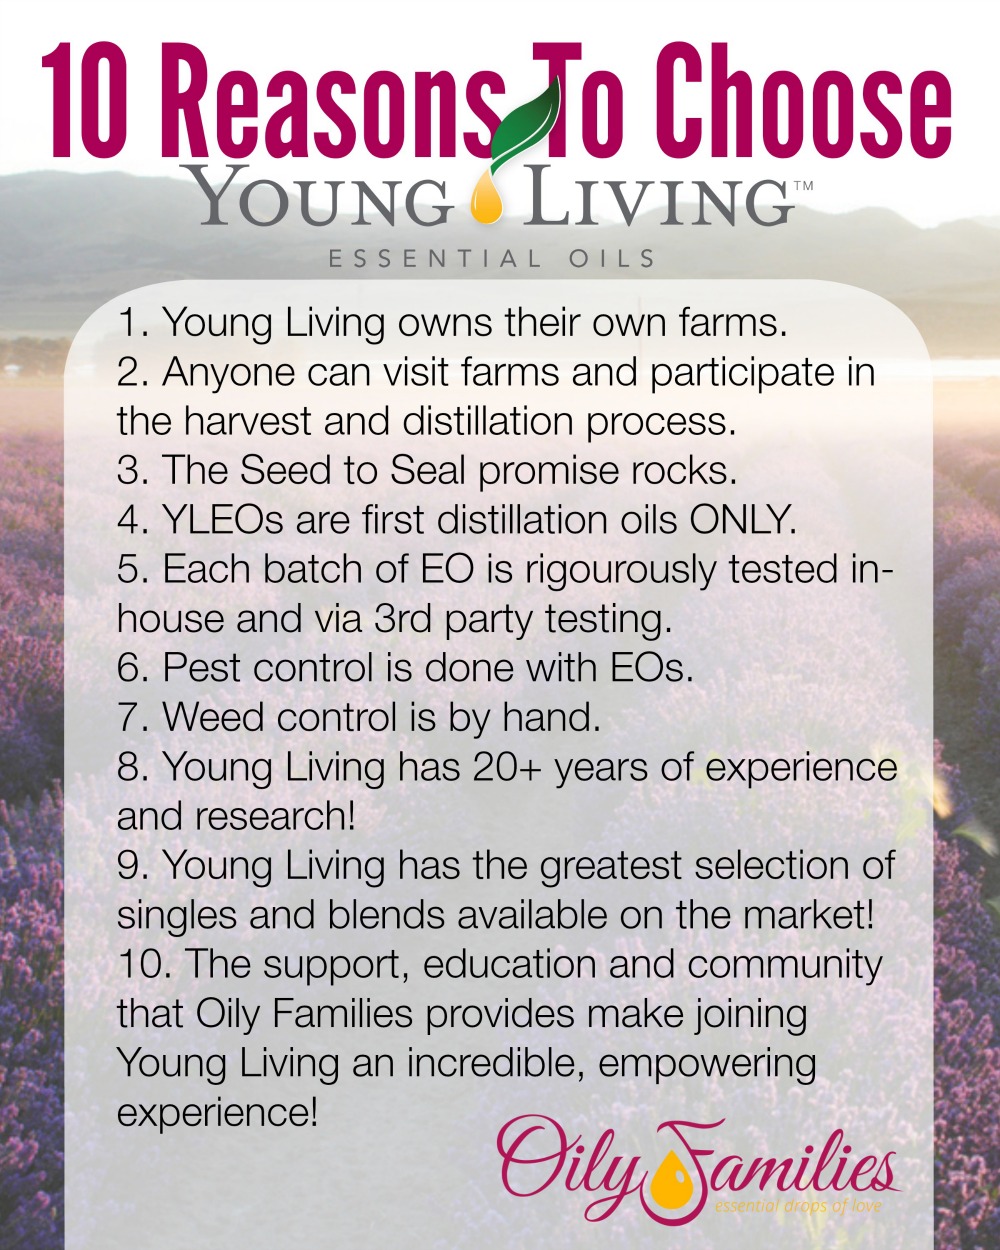 Young Living Essential Oils Just Work!